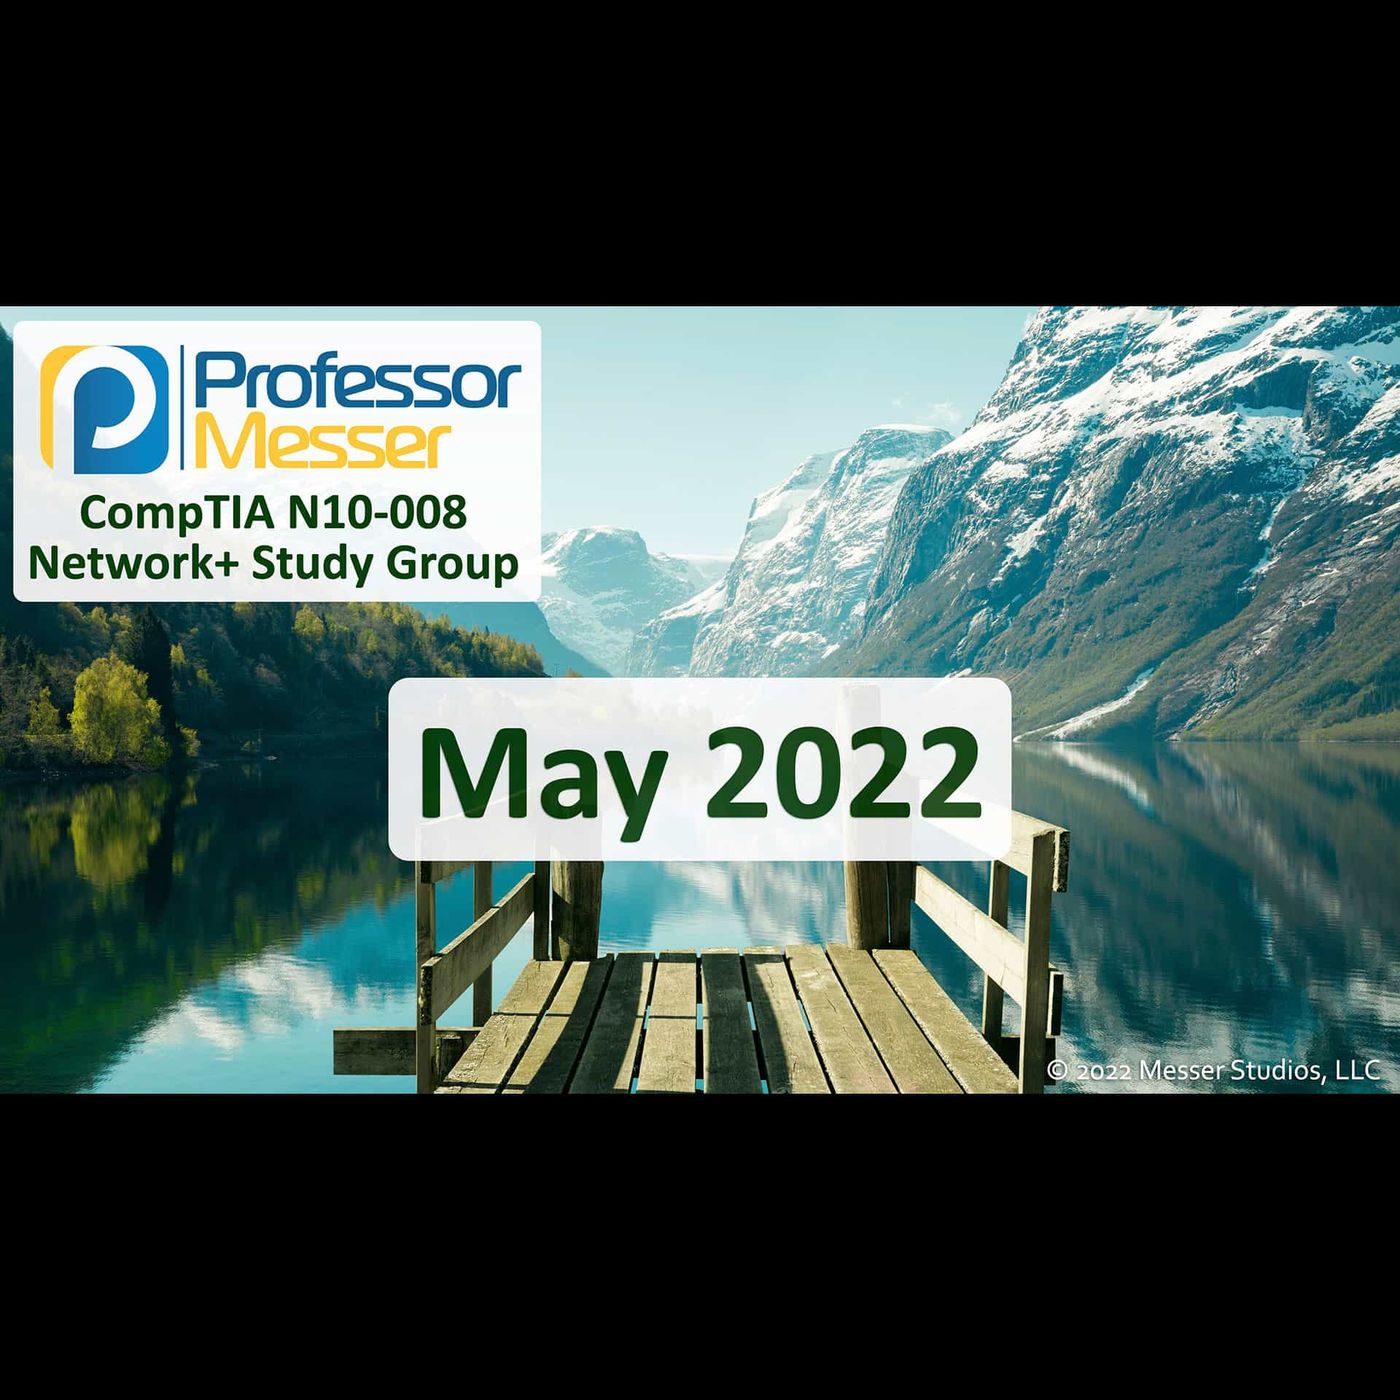 Professor Messer's N10-008 Network+ Study Group - May 2022